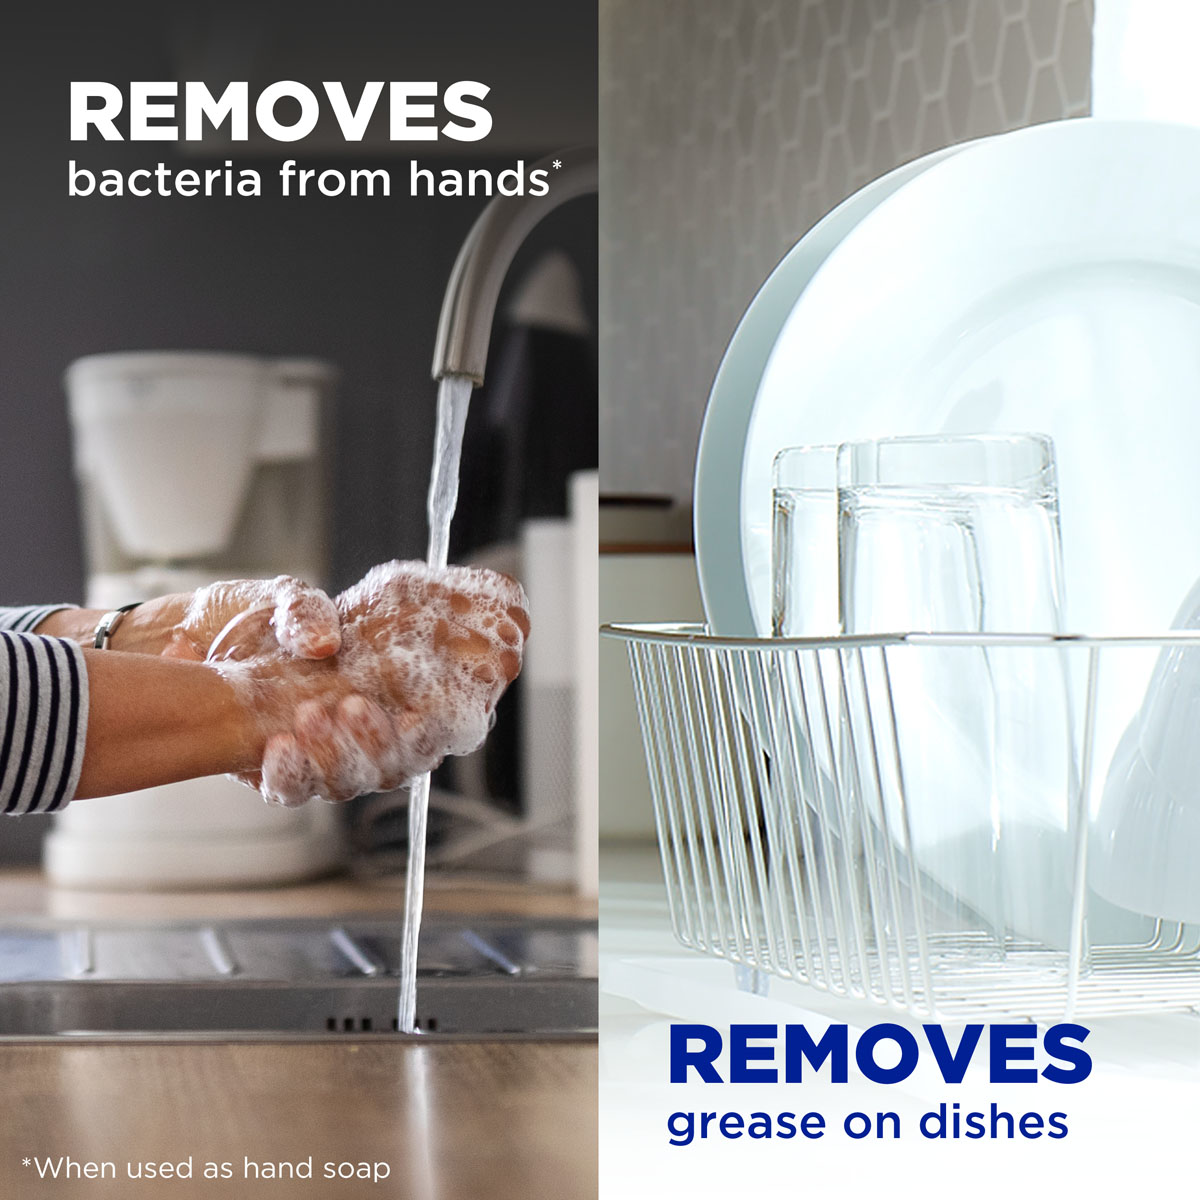 Removes bacteria from hands